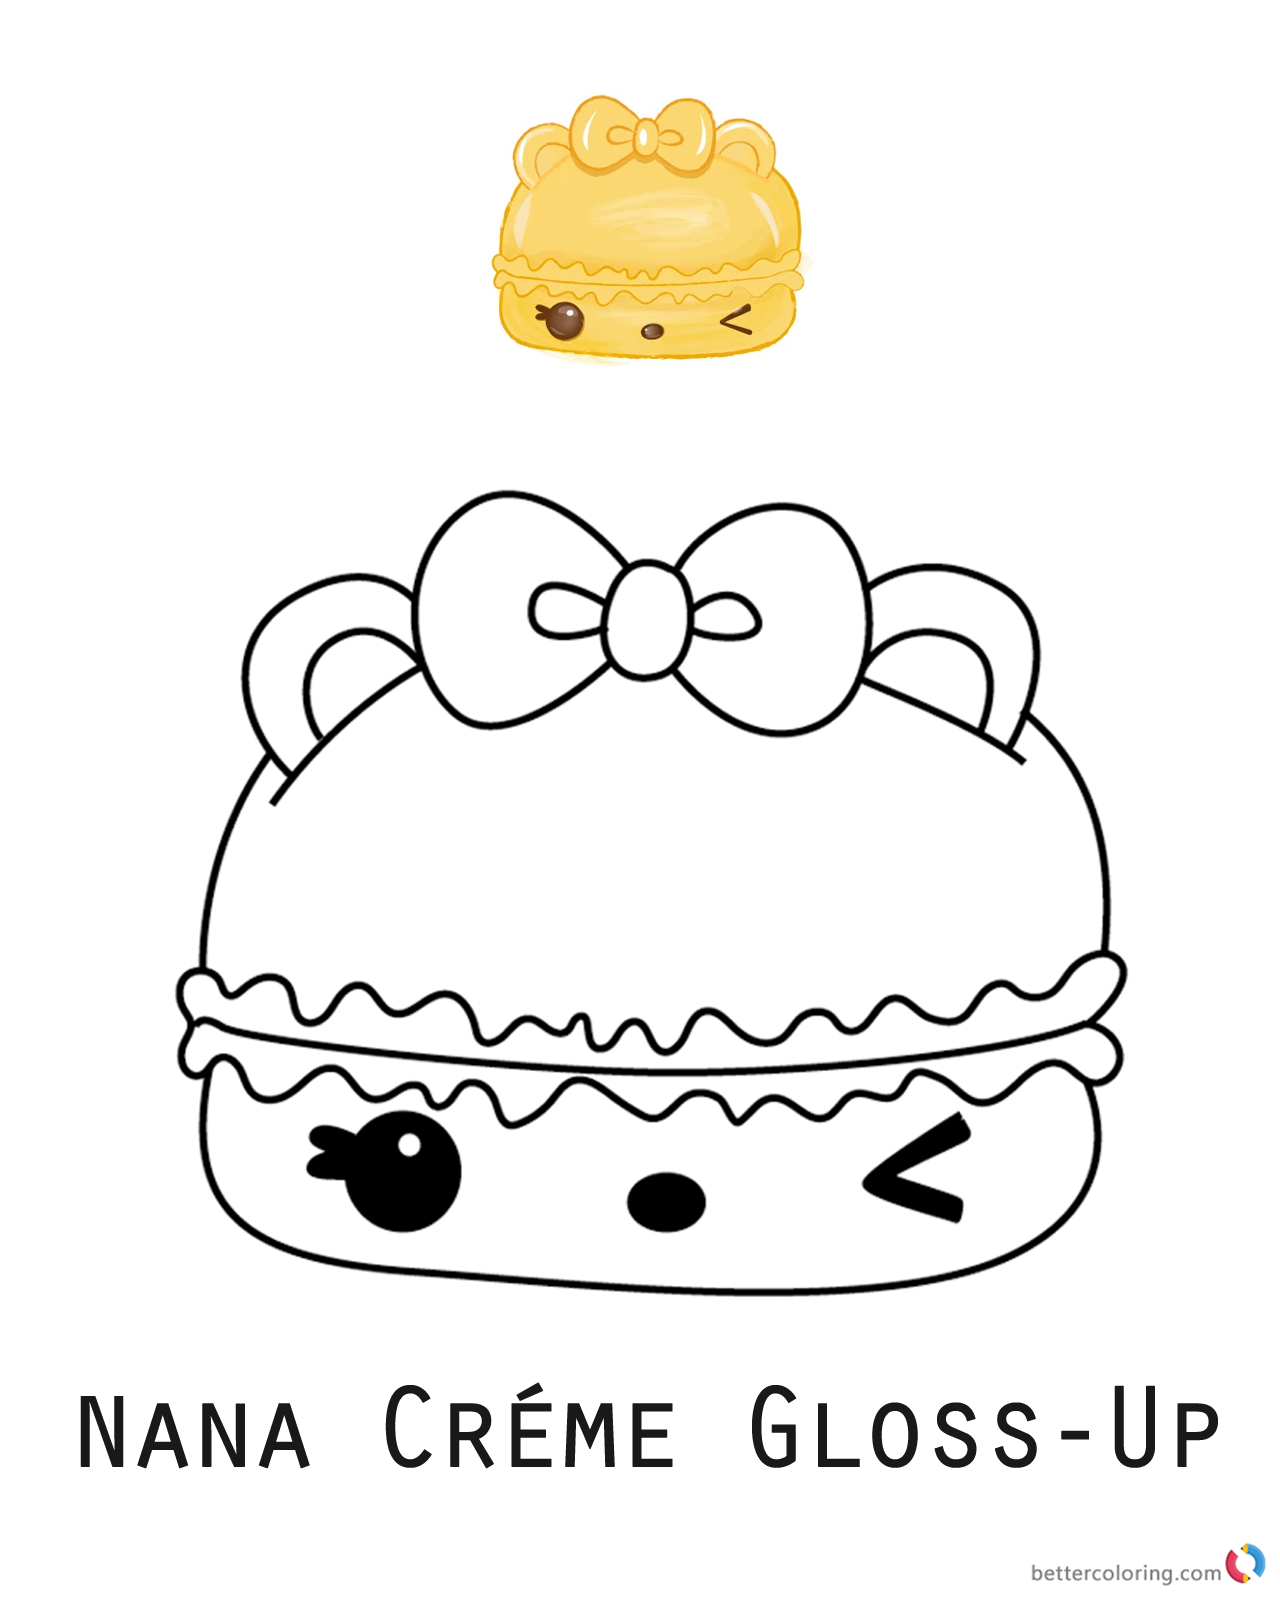 Nana Creme Gloss-Up from Num Noms coloring pages printable